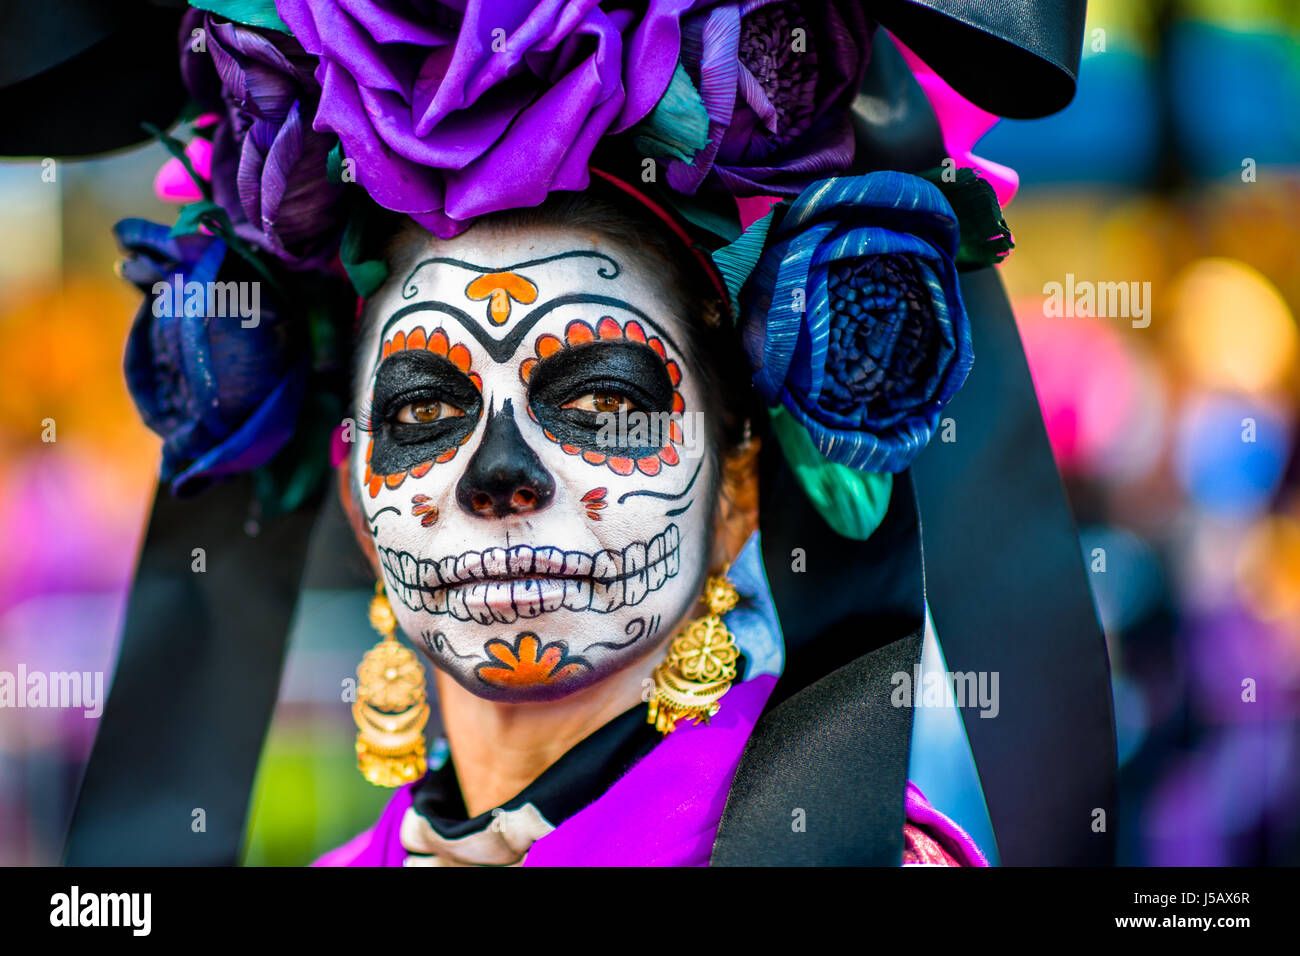 A young woman, dressed as La Catrina, performs during the Day of the Dead  festival in Mexico City, Mexico Stock Photo - Alamy